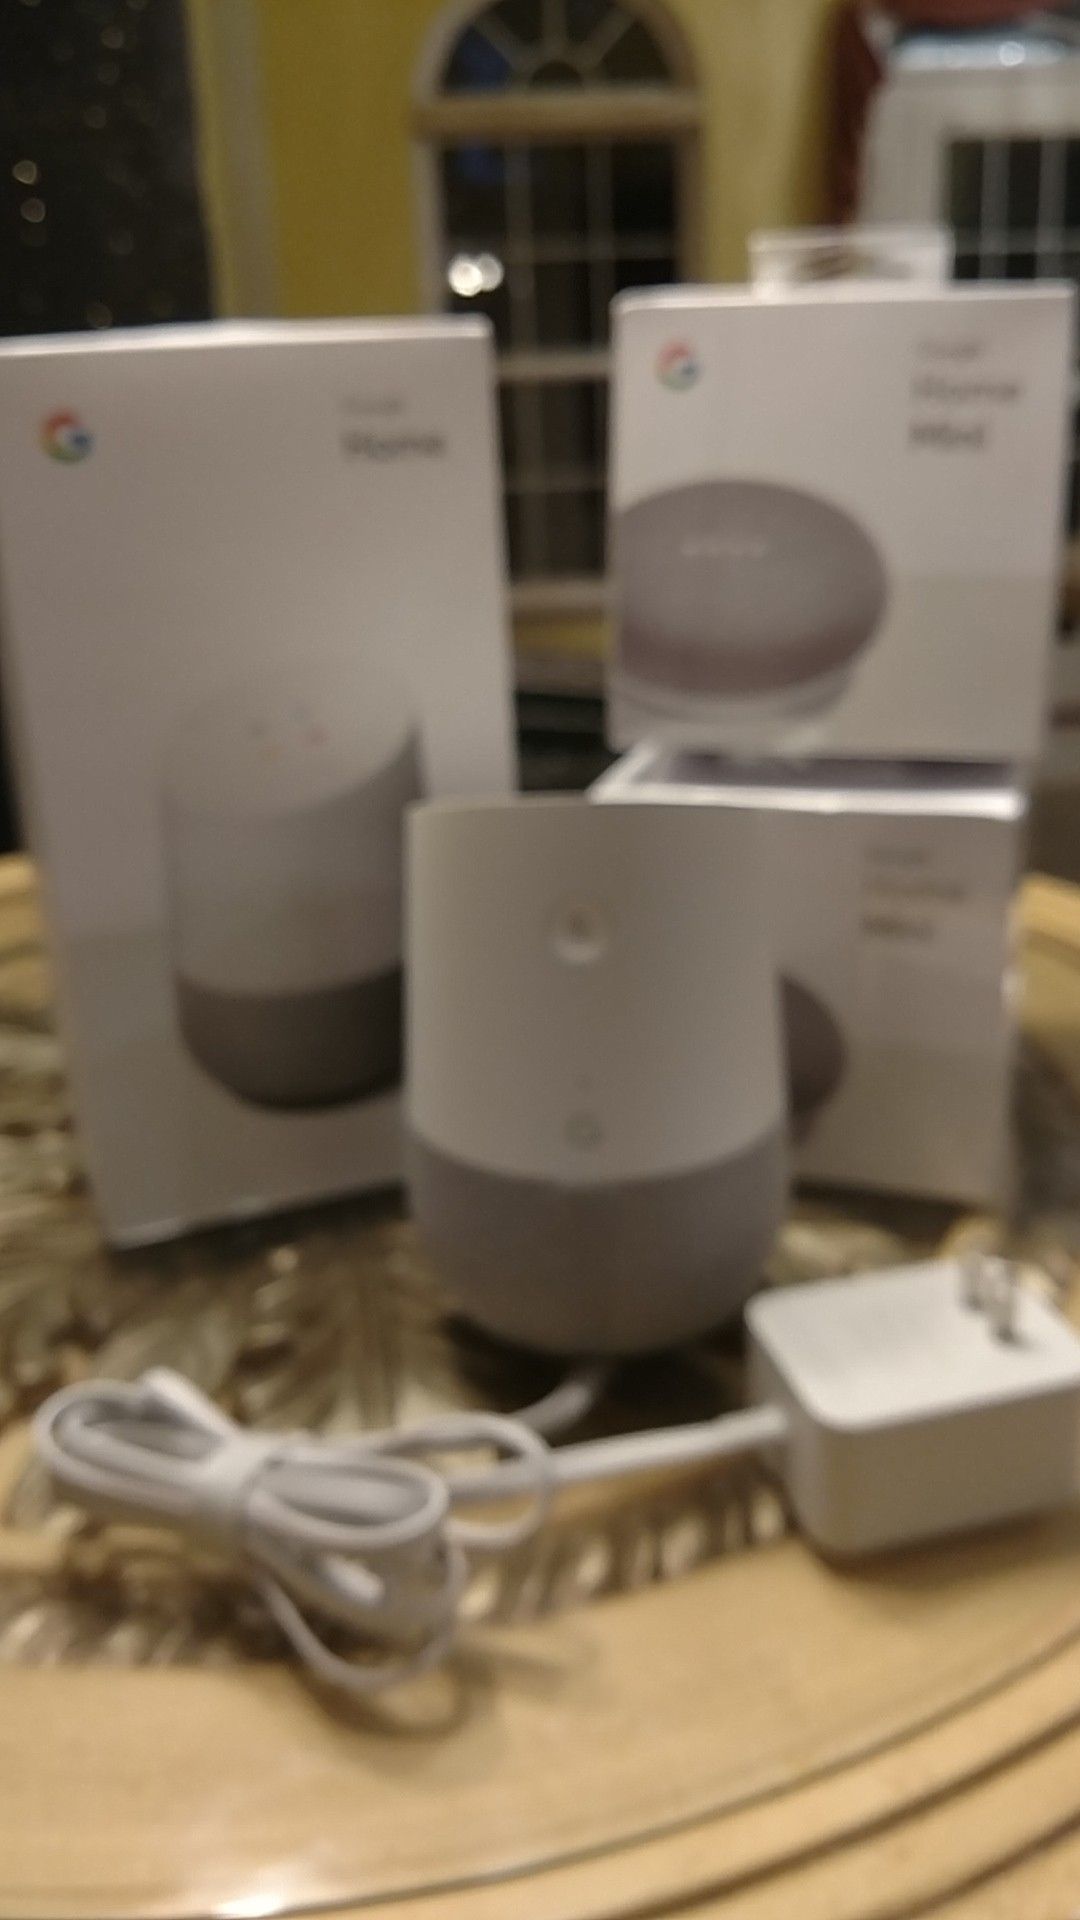 Google Assistant( 3 small ones)